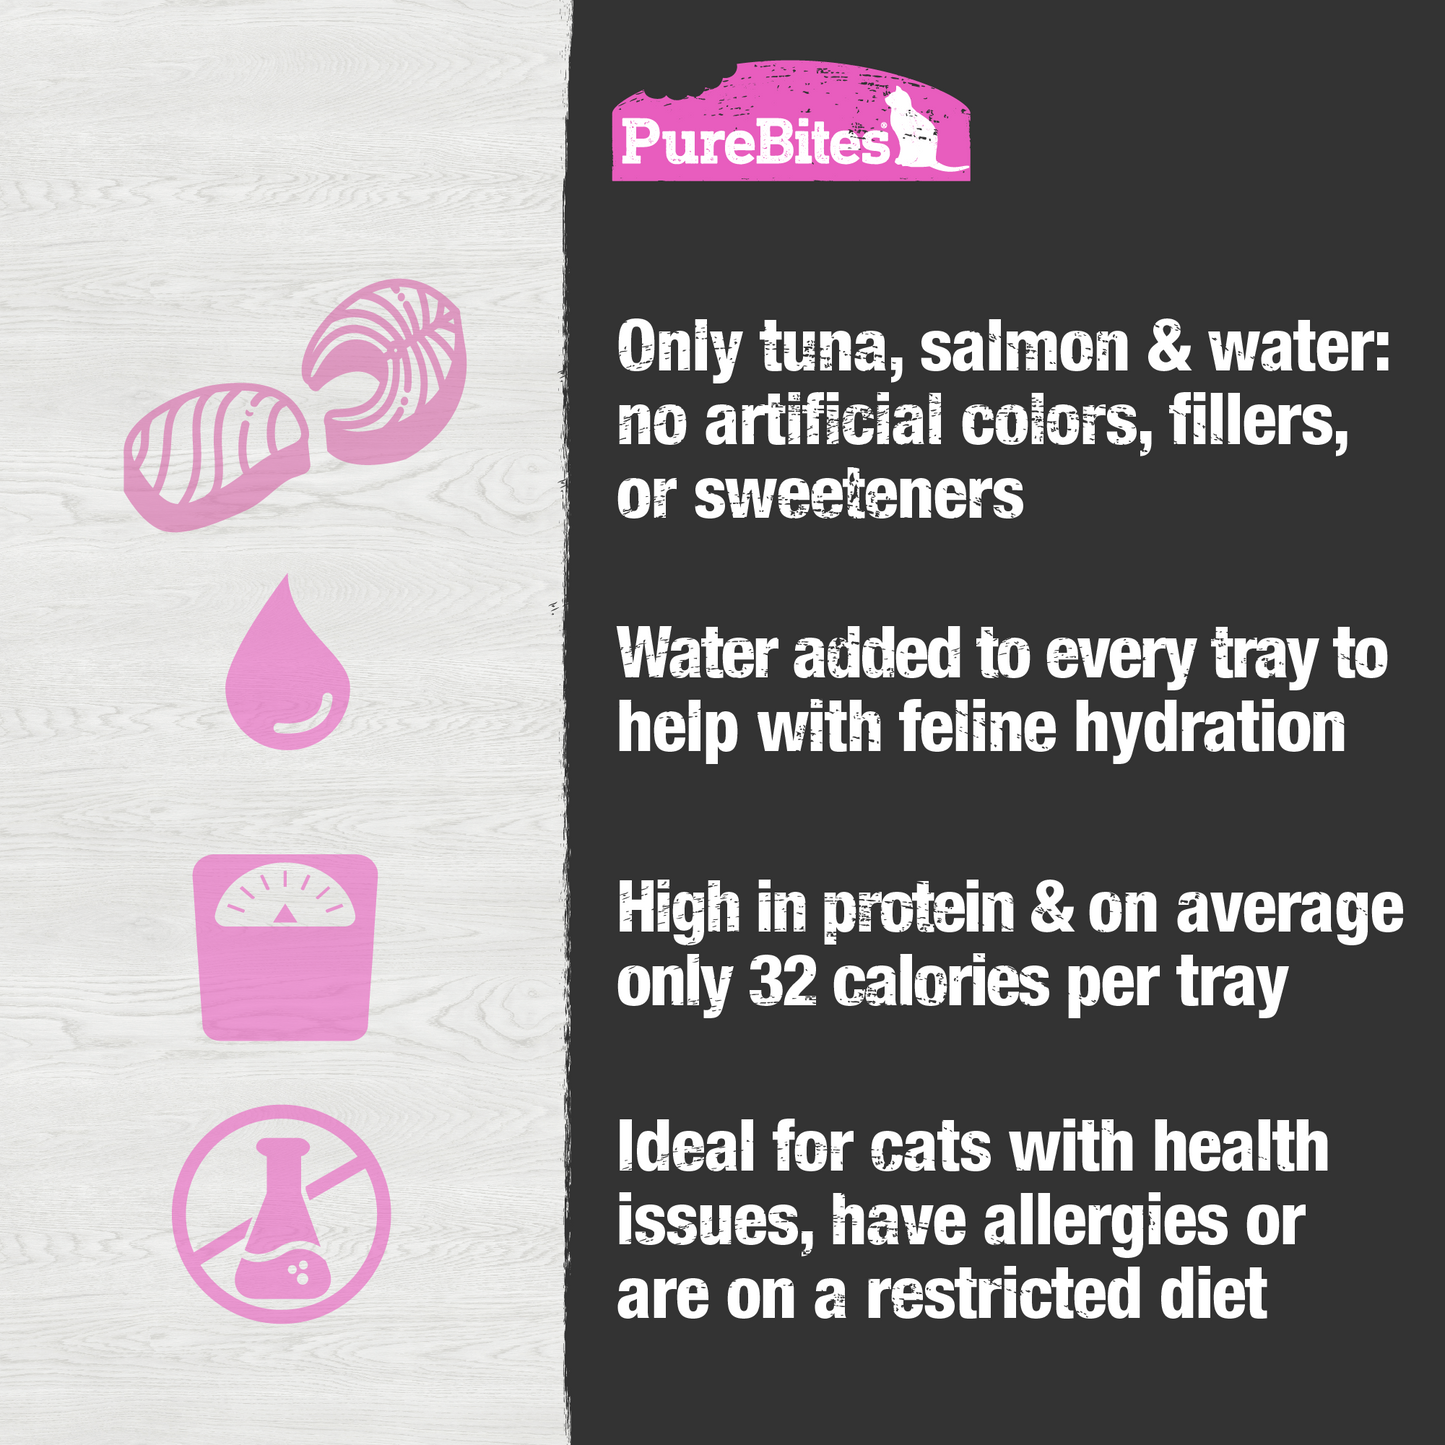 Make snack time or mealtime exciting for picky eaters!  A nutritious and flavorful feast; 100% natural, high in protein, low in calories (only 32 calories per tray), and with water added for the essential hydration cats need